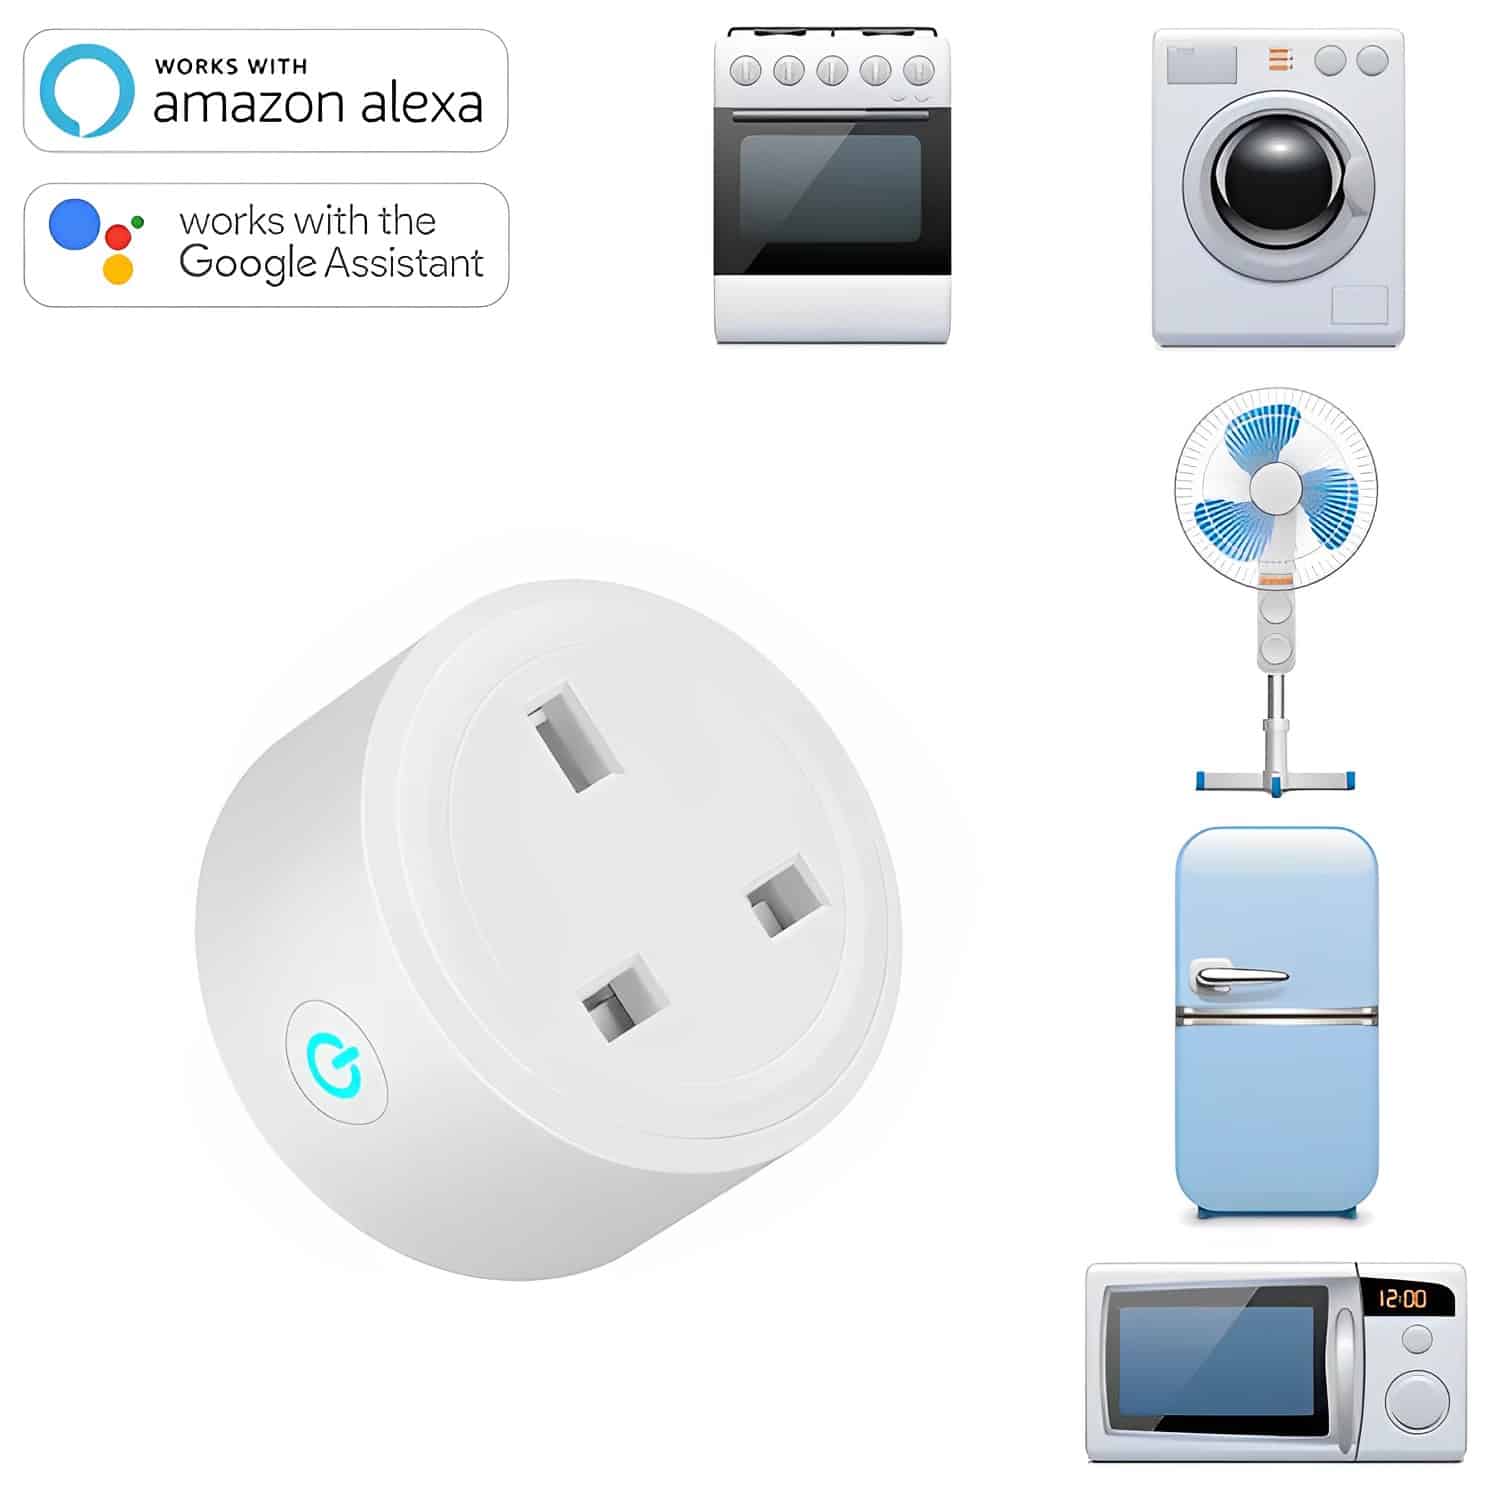 This UK Smart Plug with Voice Control is a must have for all homes to remotely turn off all appliances connected to the plug.